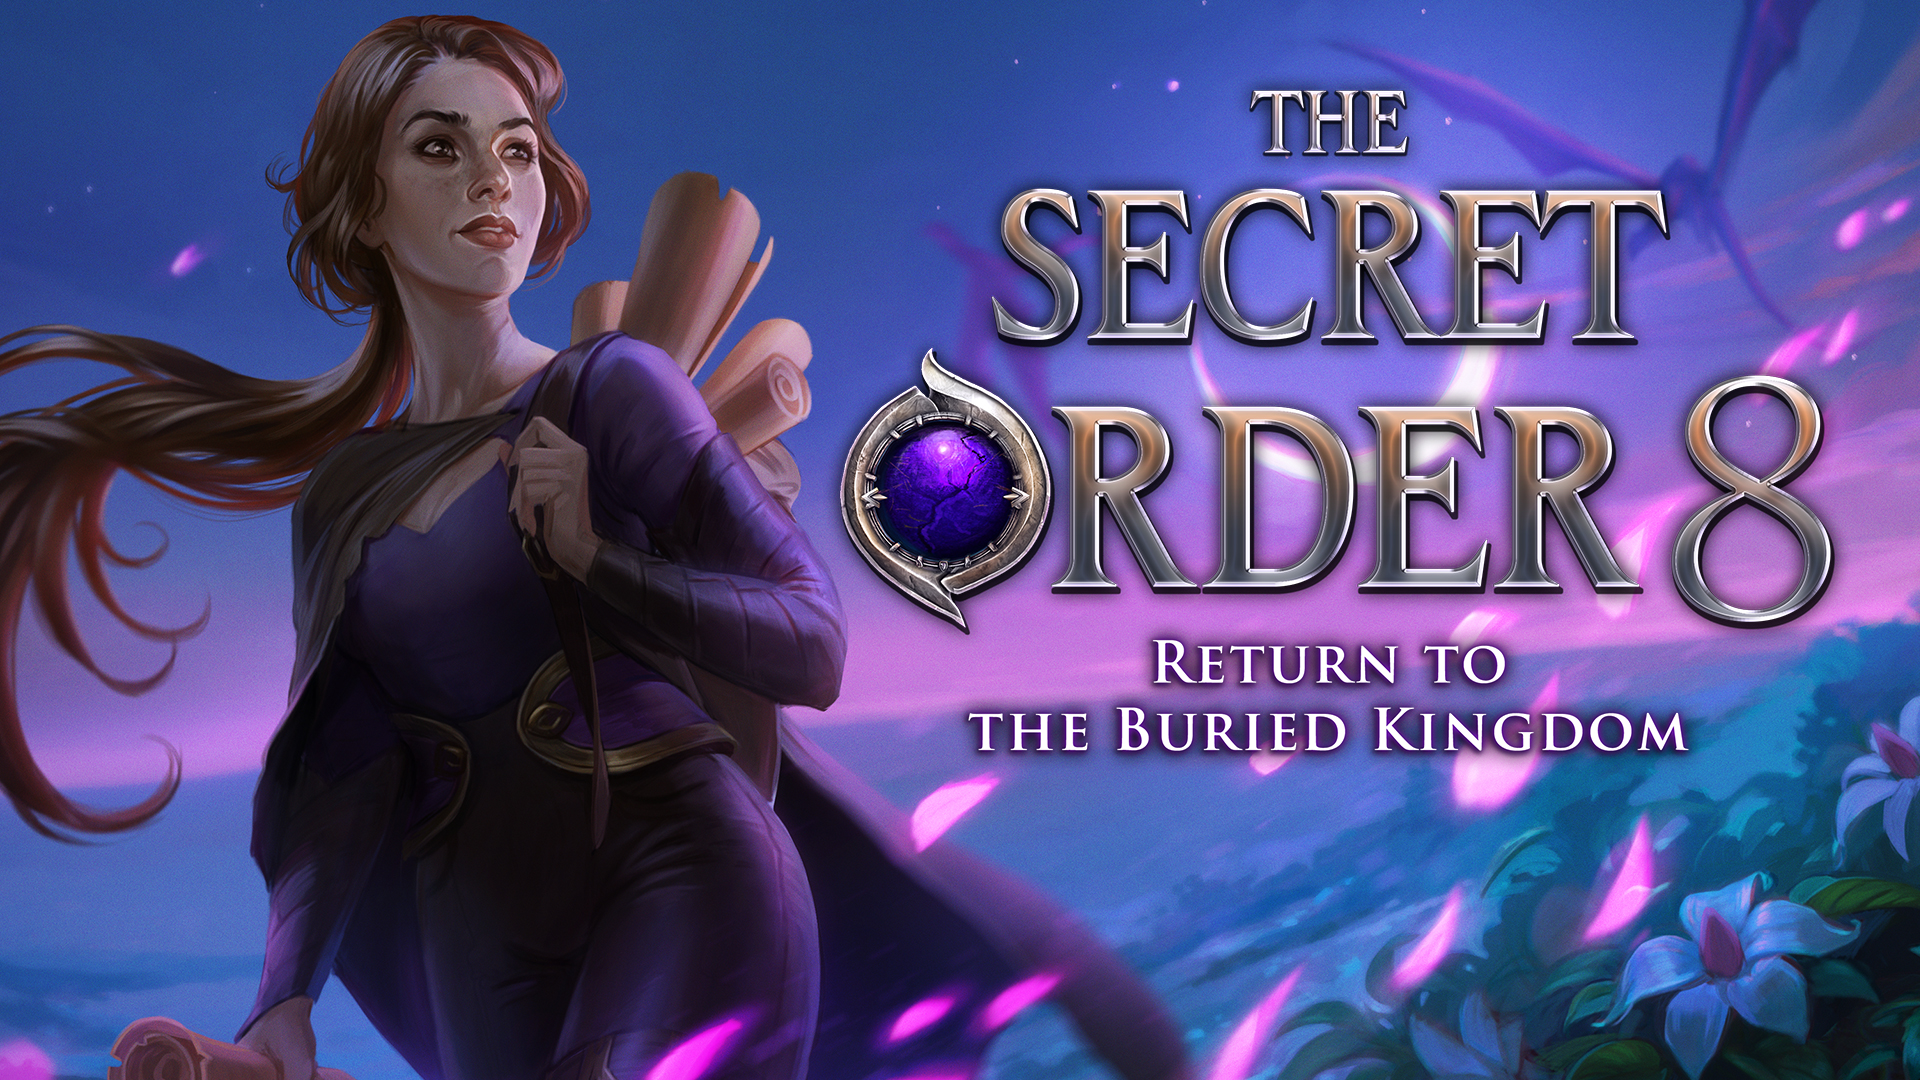 download the last version for ios The Secret Order 8: Return to the Buried Kingdom